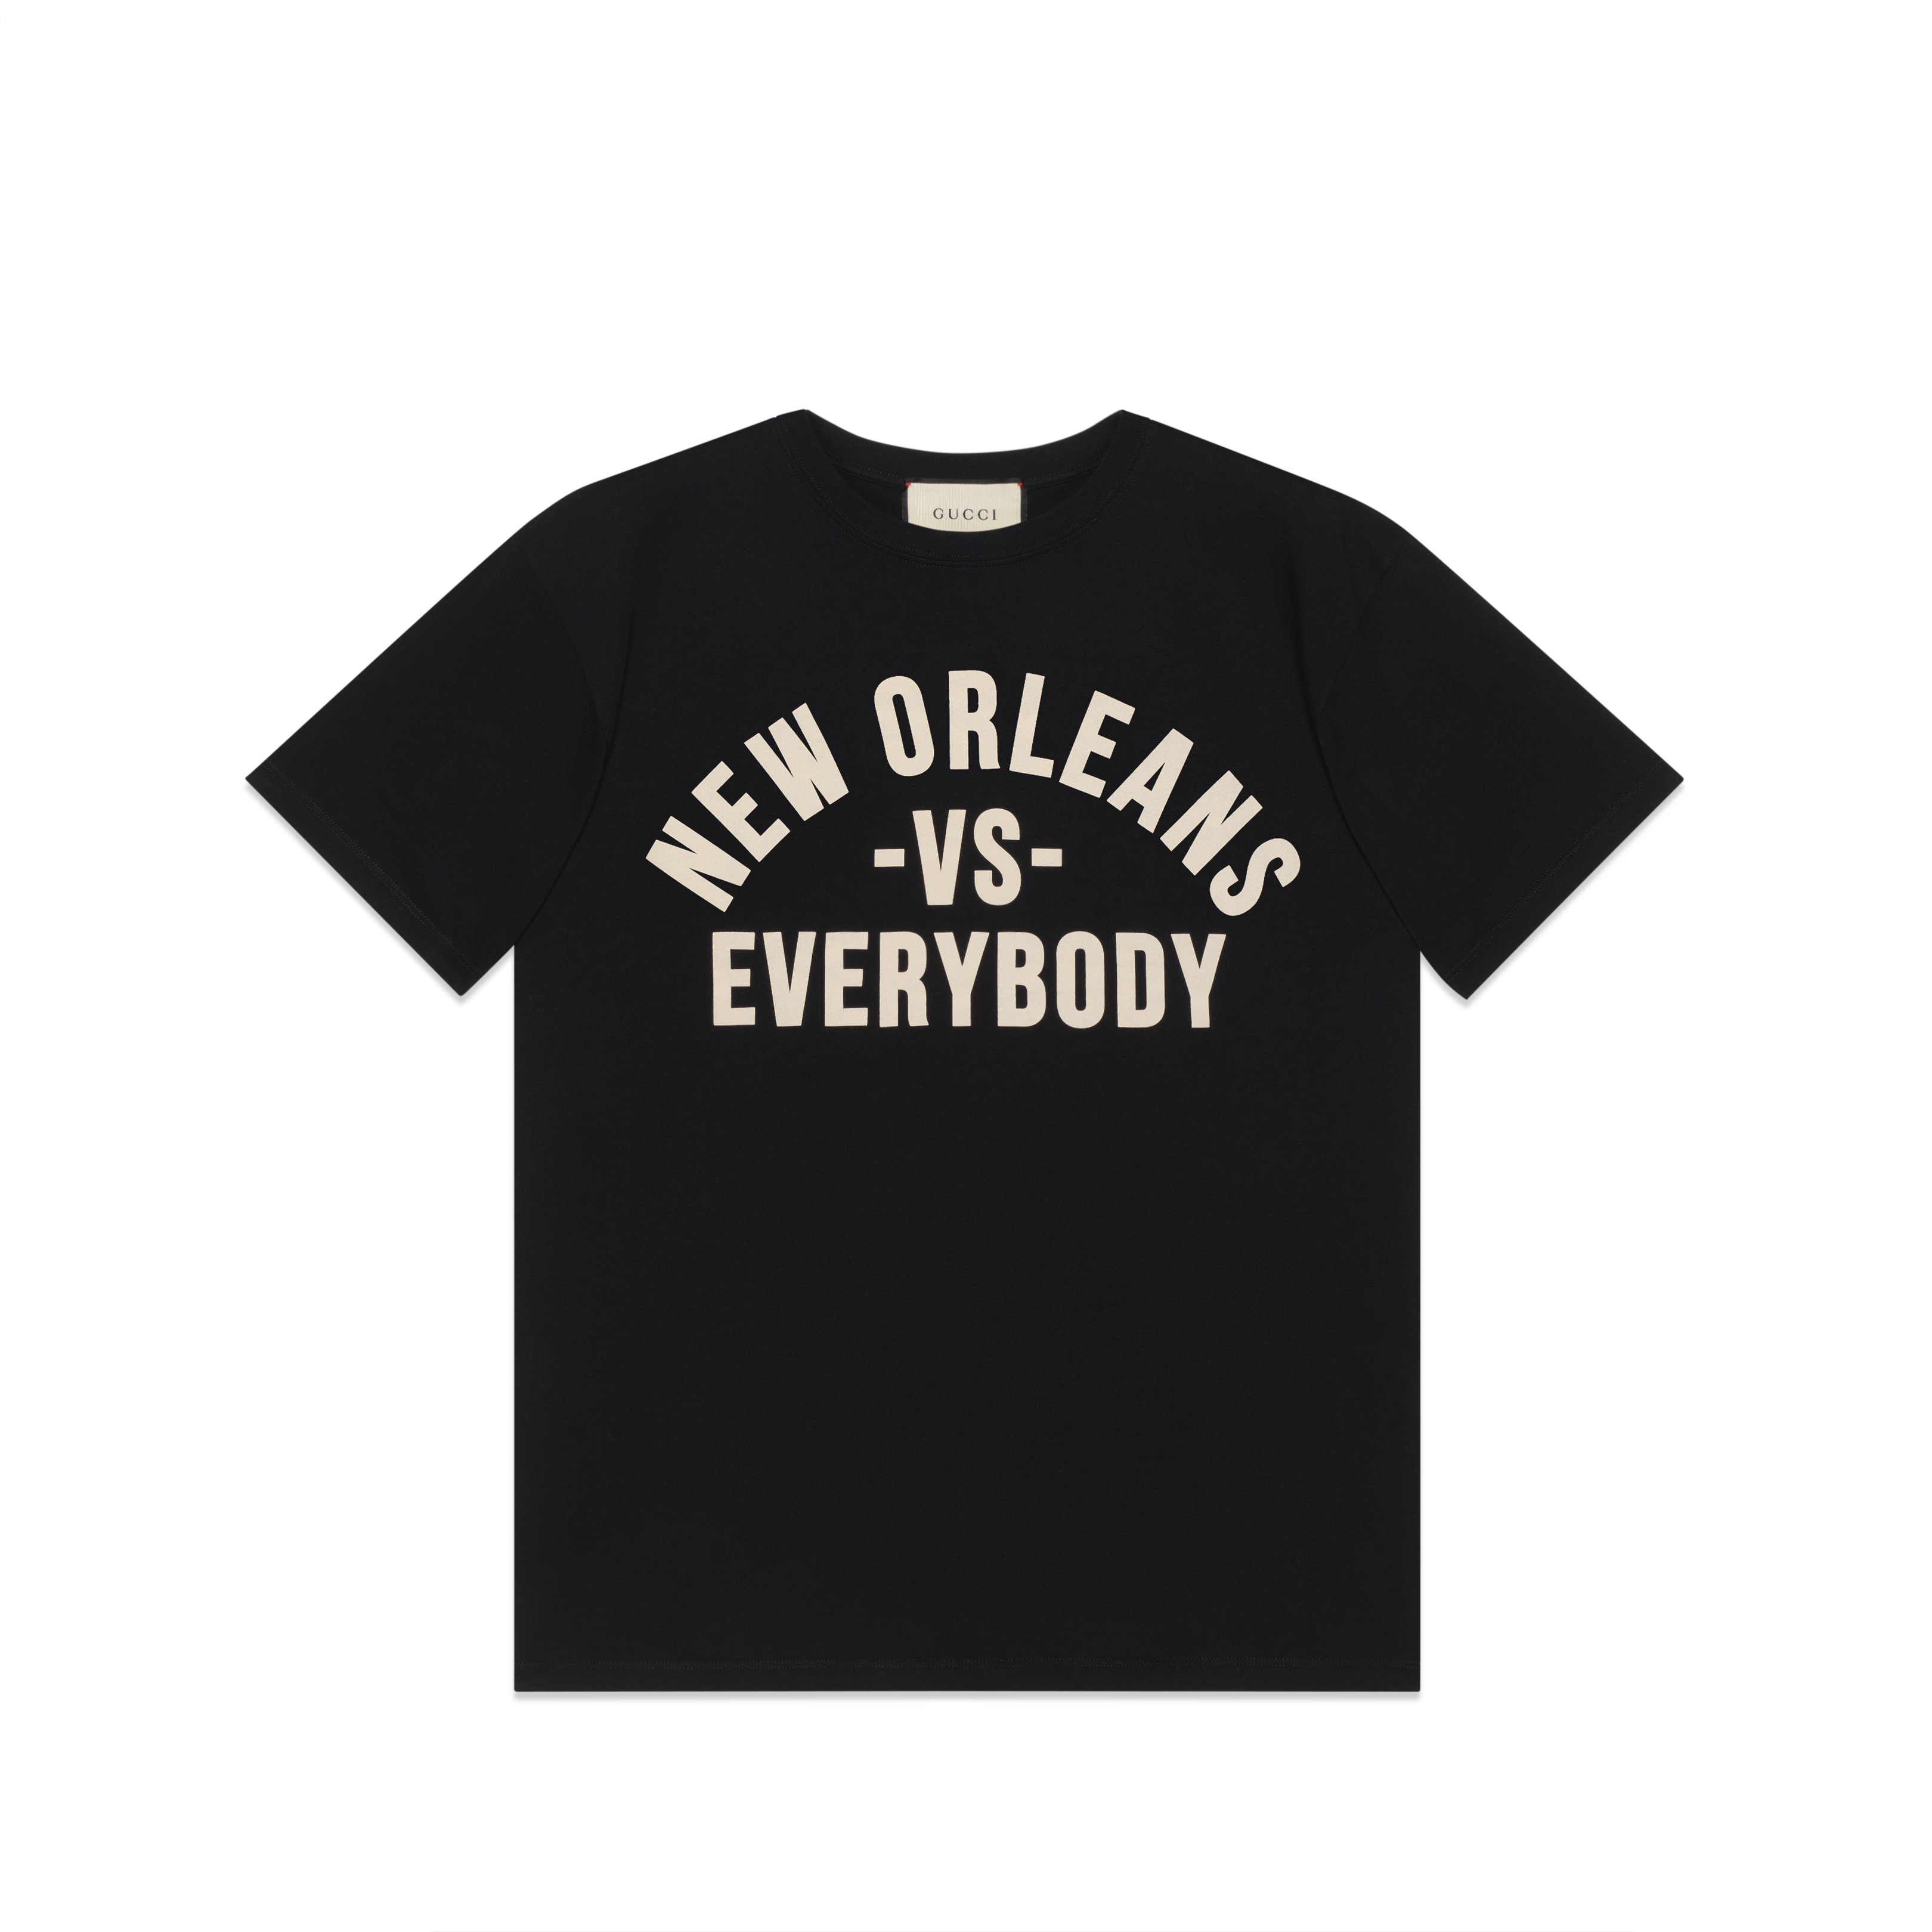 Gucci's New Detroit T-Shirts Take a Fighting Stance — This